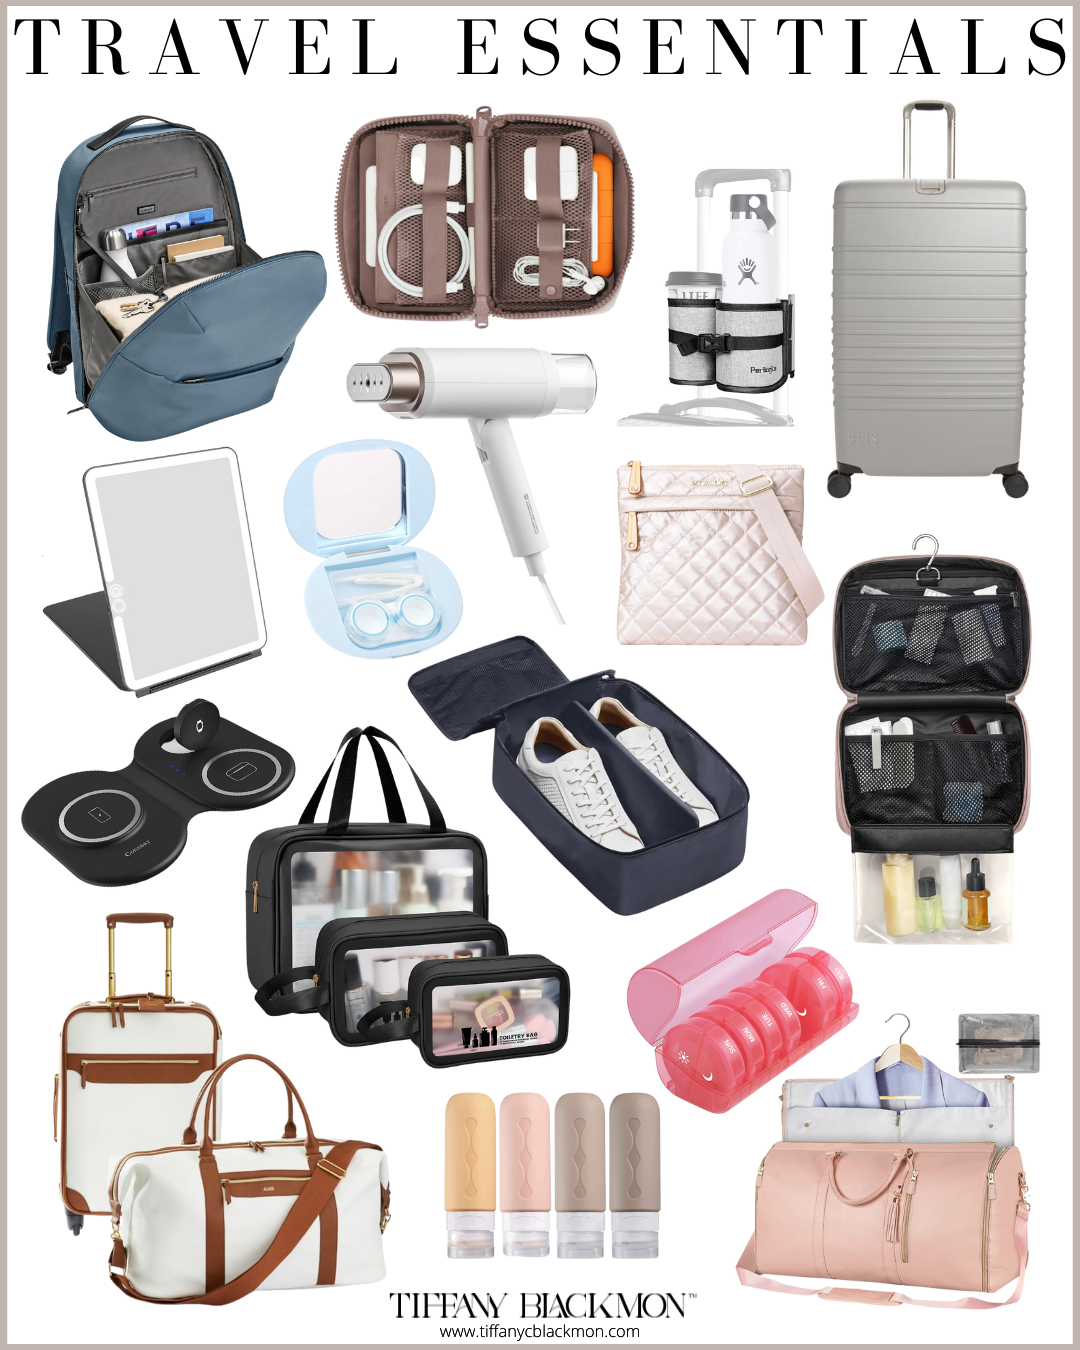 Travel Essentials
#travel #packing #Packingessentials #luggage #carryon #tech #organizers #travelbag #tech #organization 